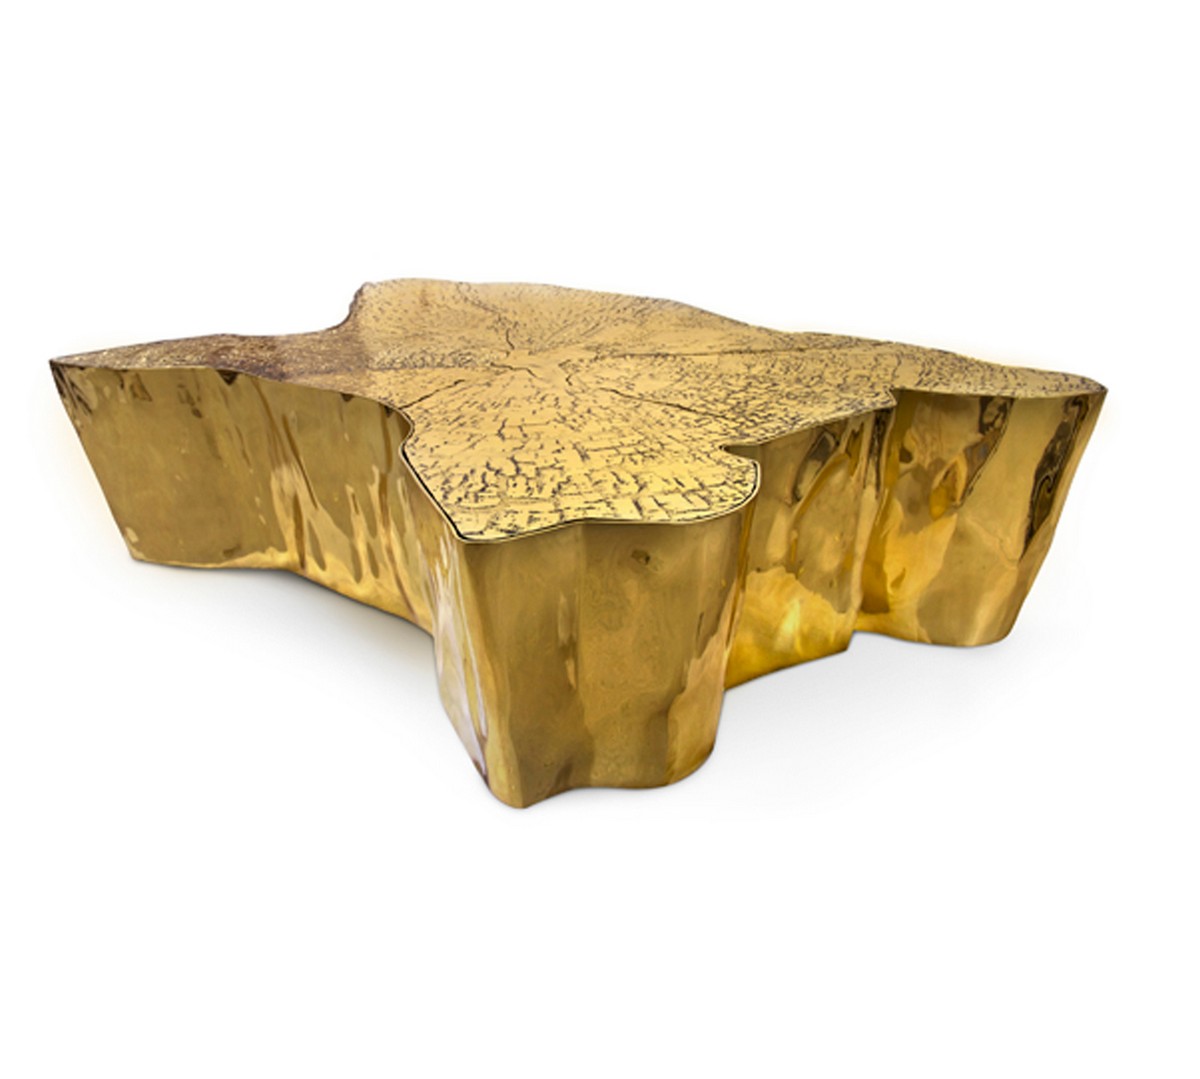 Artistic Center Tables That Will Inspire You Forever